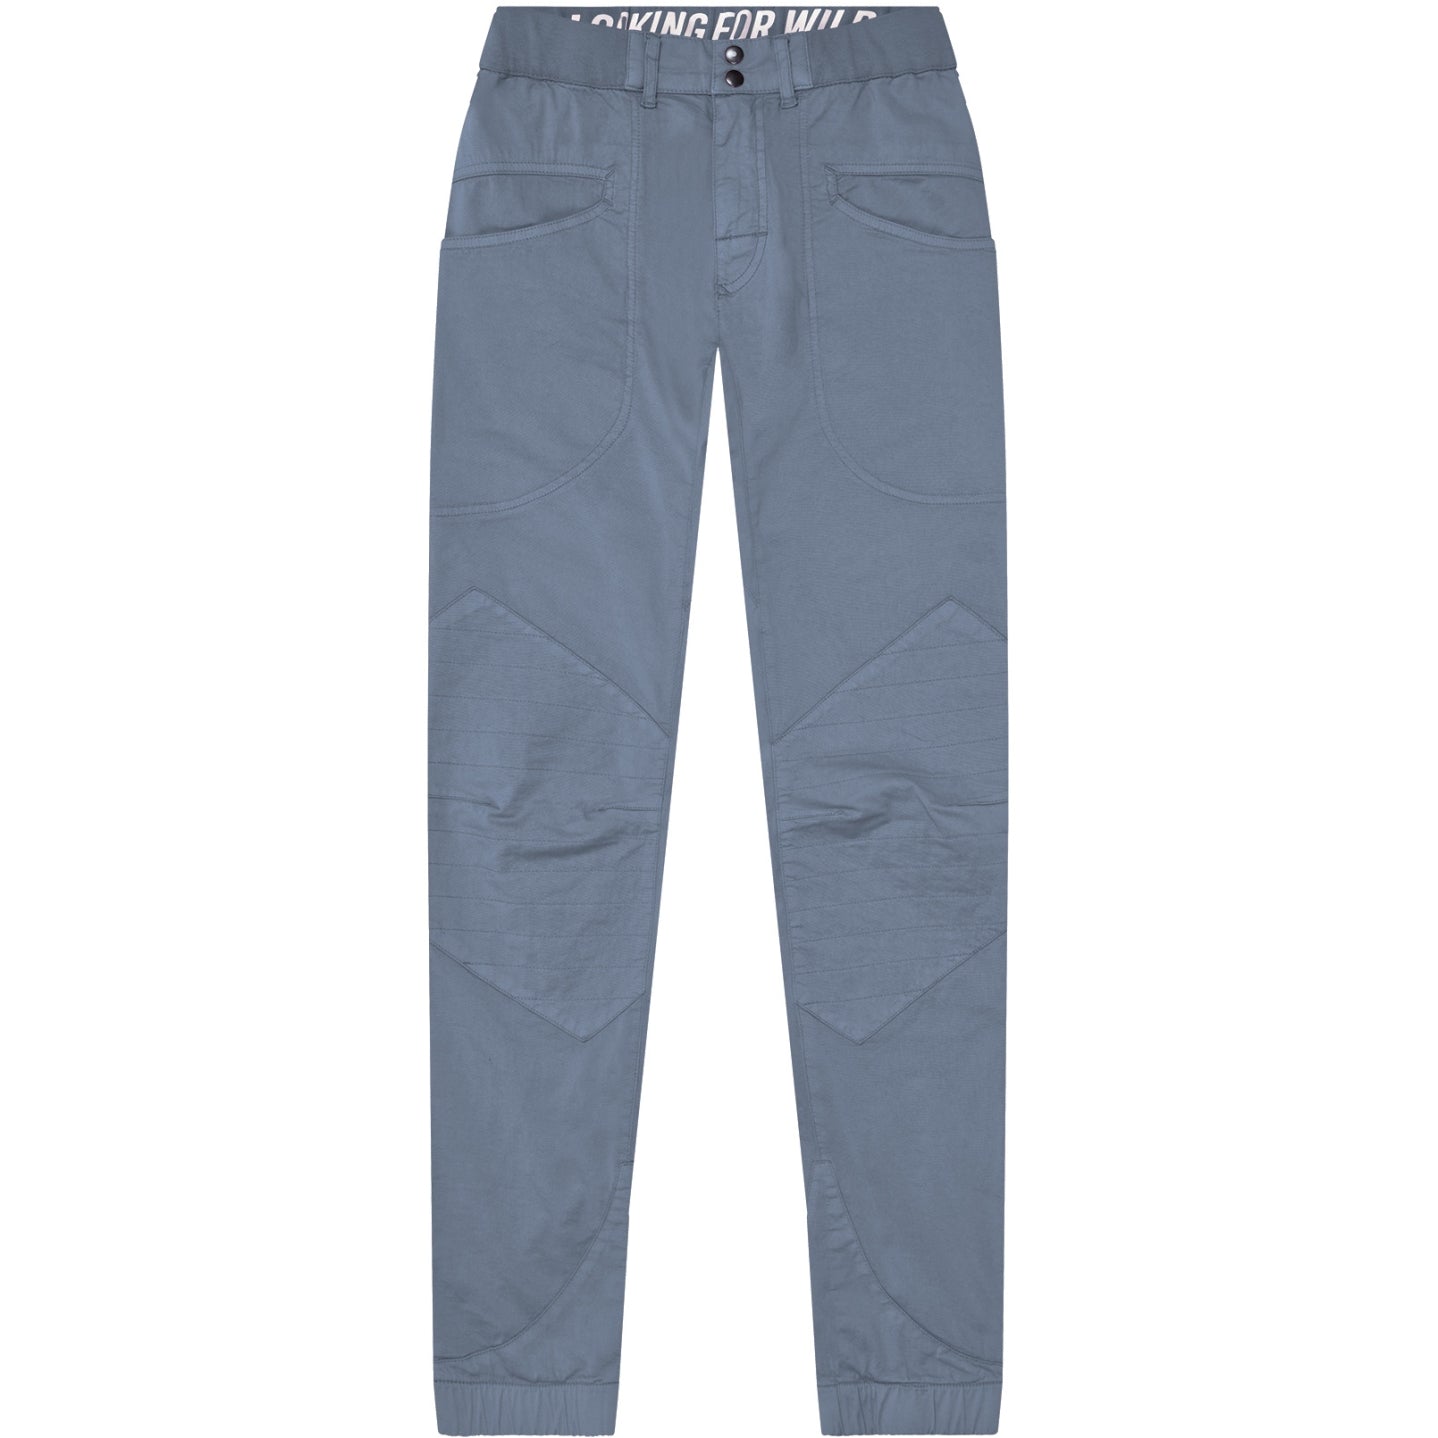 Looking For Wild - Fitz Roy Pant - Flint Stone